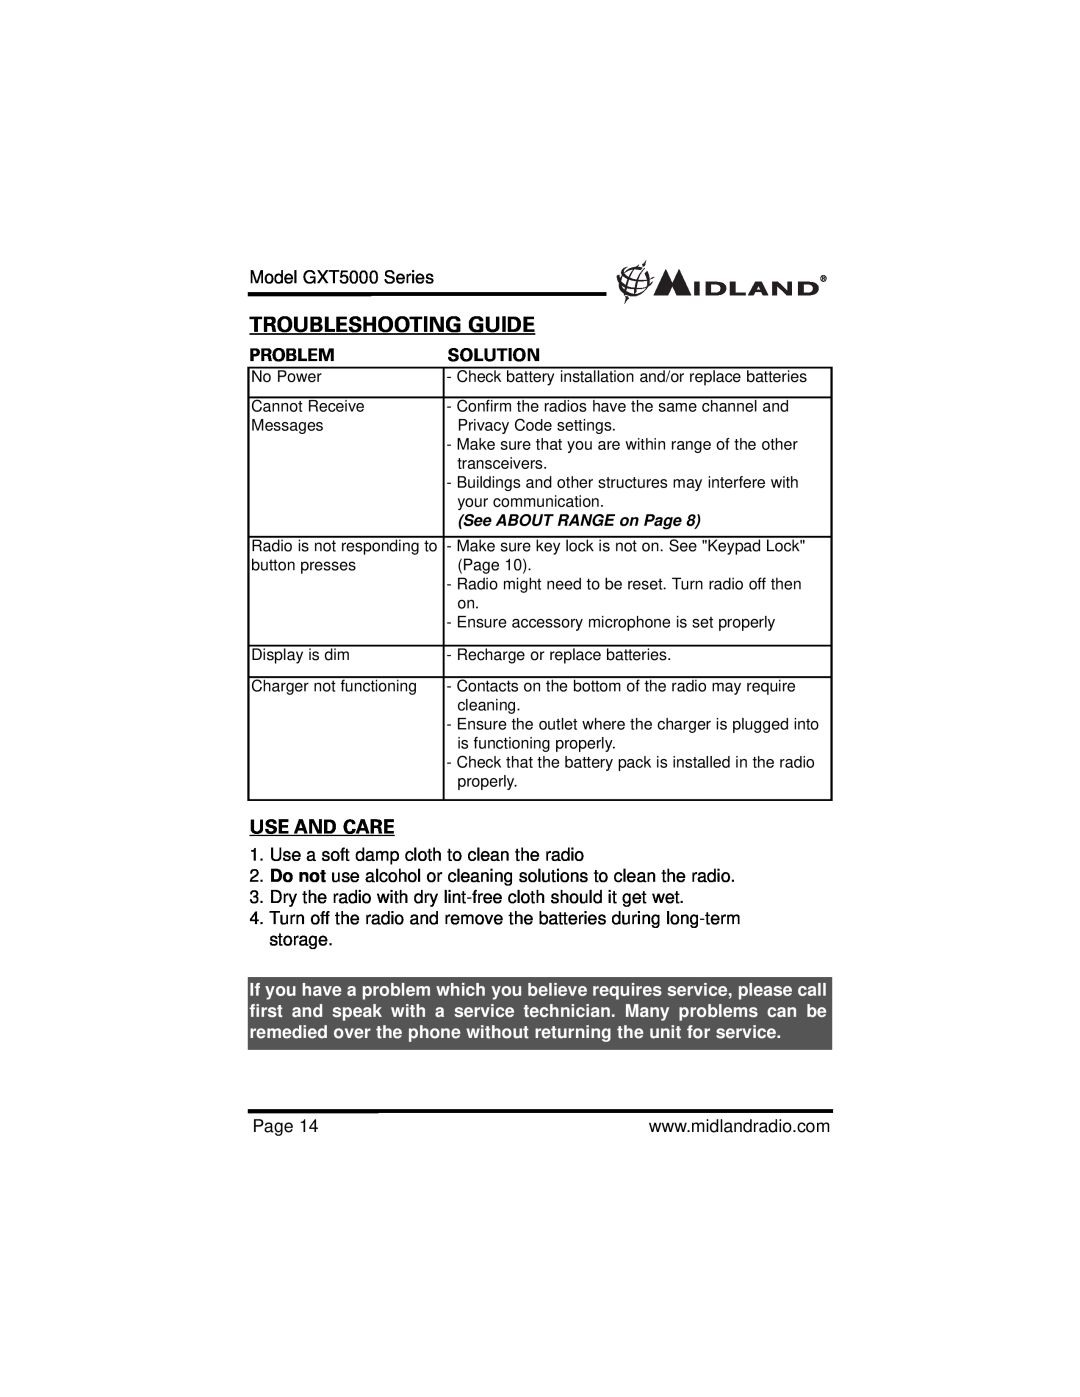 Midland Radio GXT5000 specifications Troubleshooting Guide, Use And Care, See ABOUT RANGE on Page 